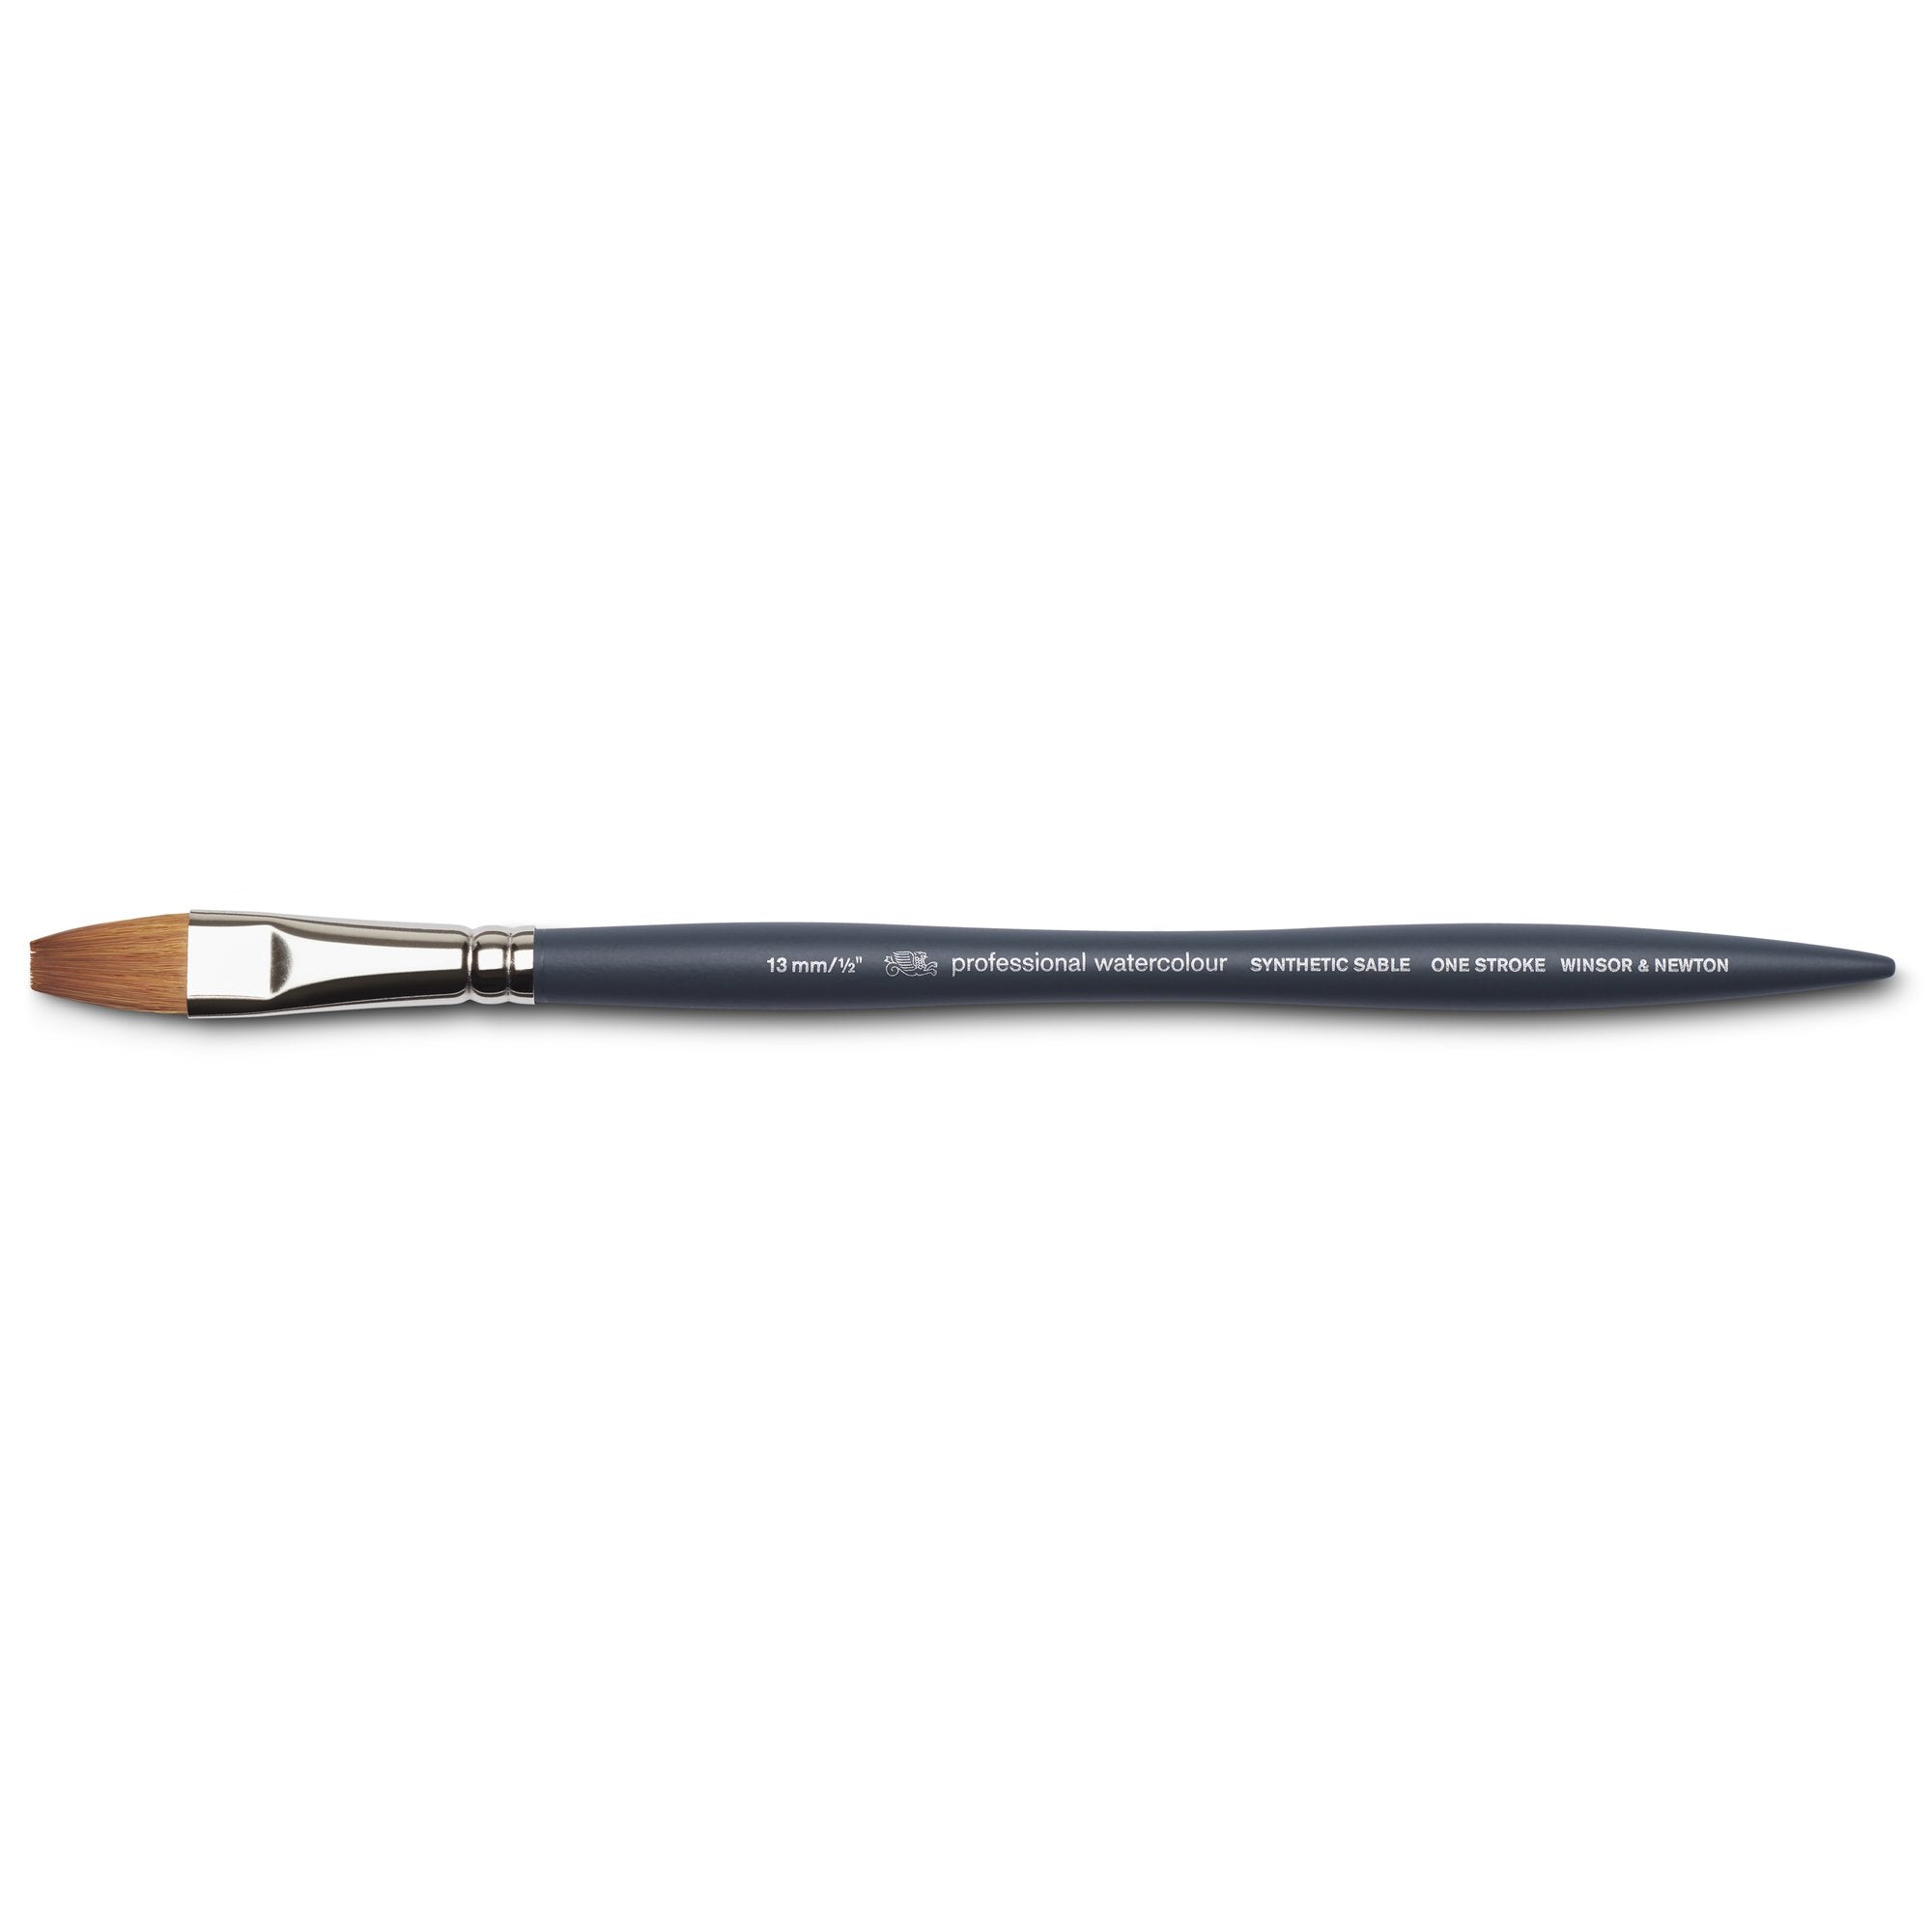 Winsor & Newton Professional Watercolour Synthetic Sable Brush one stroke 1/2 Inch